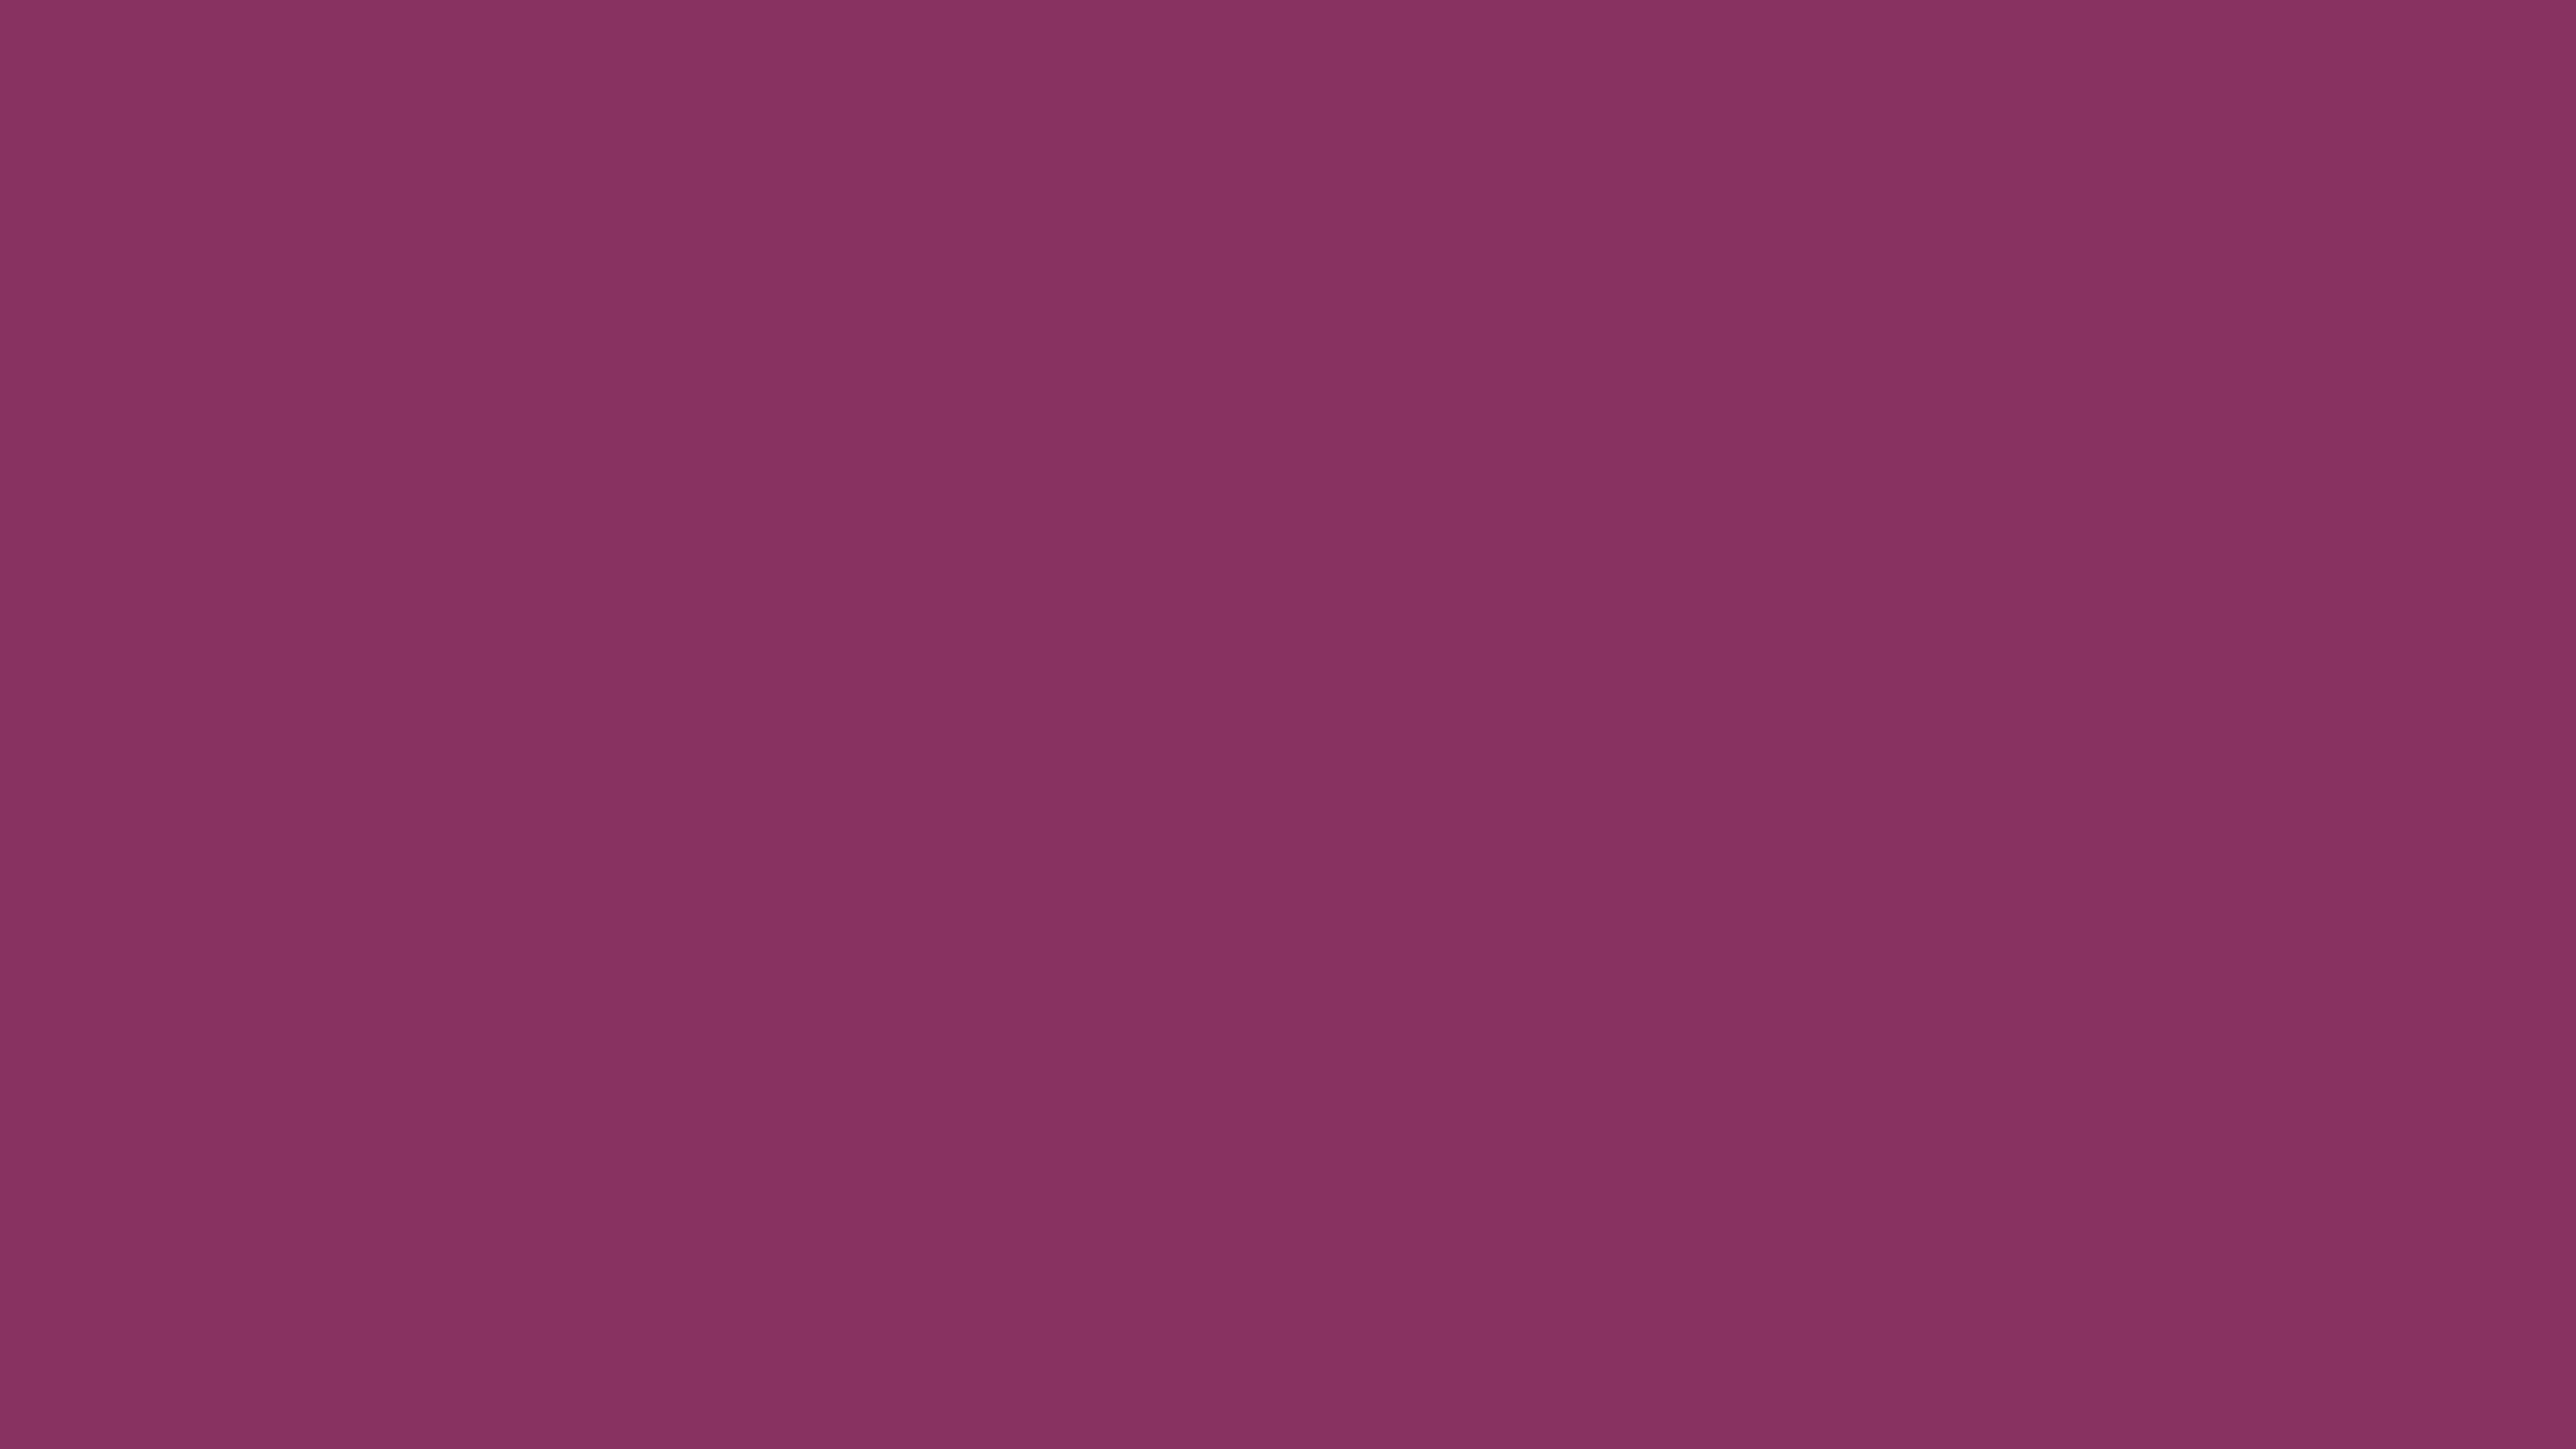 7680x4320 Boysenberry Solid Color Background